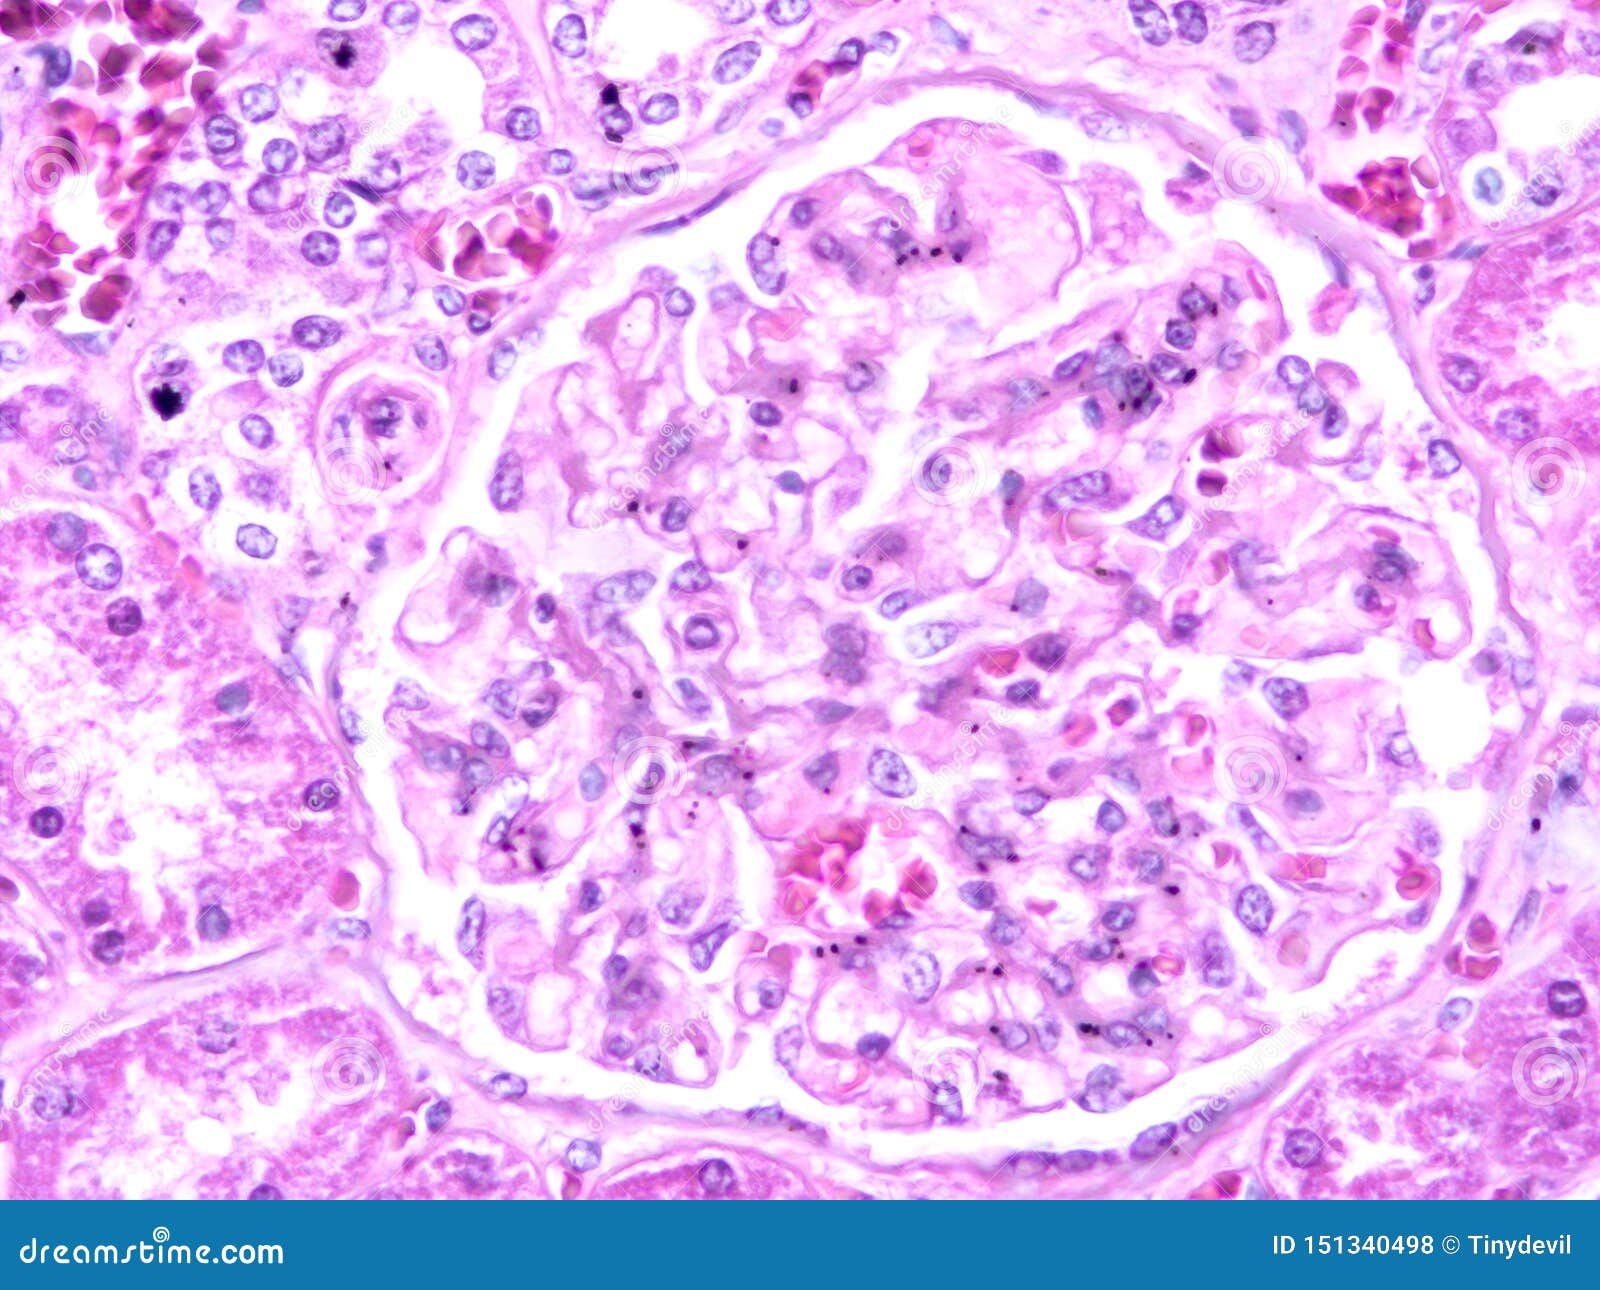 histology of human liver tissue